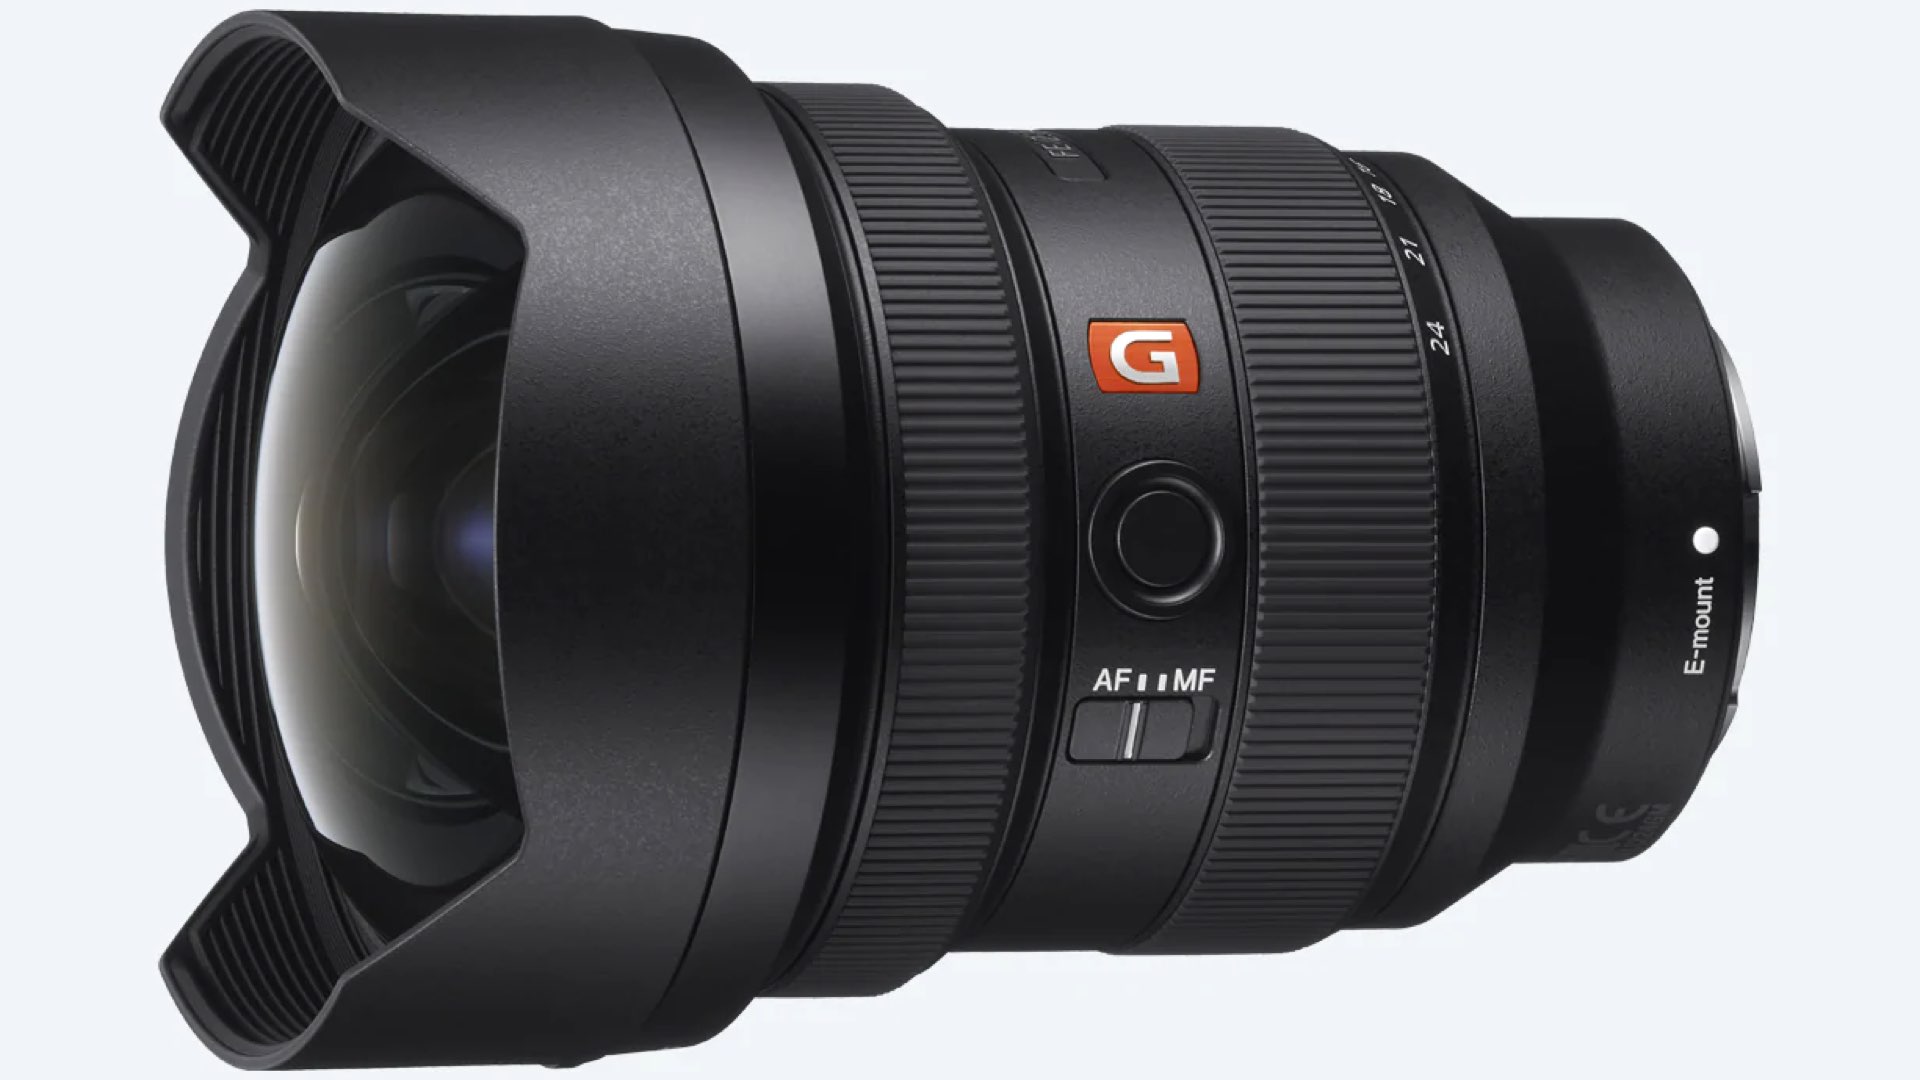 Sony's new FE 12-24mm f/2.8 GM